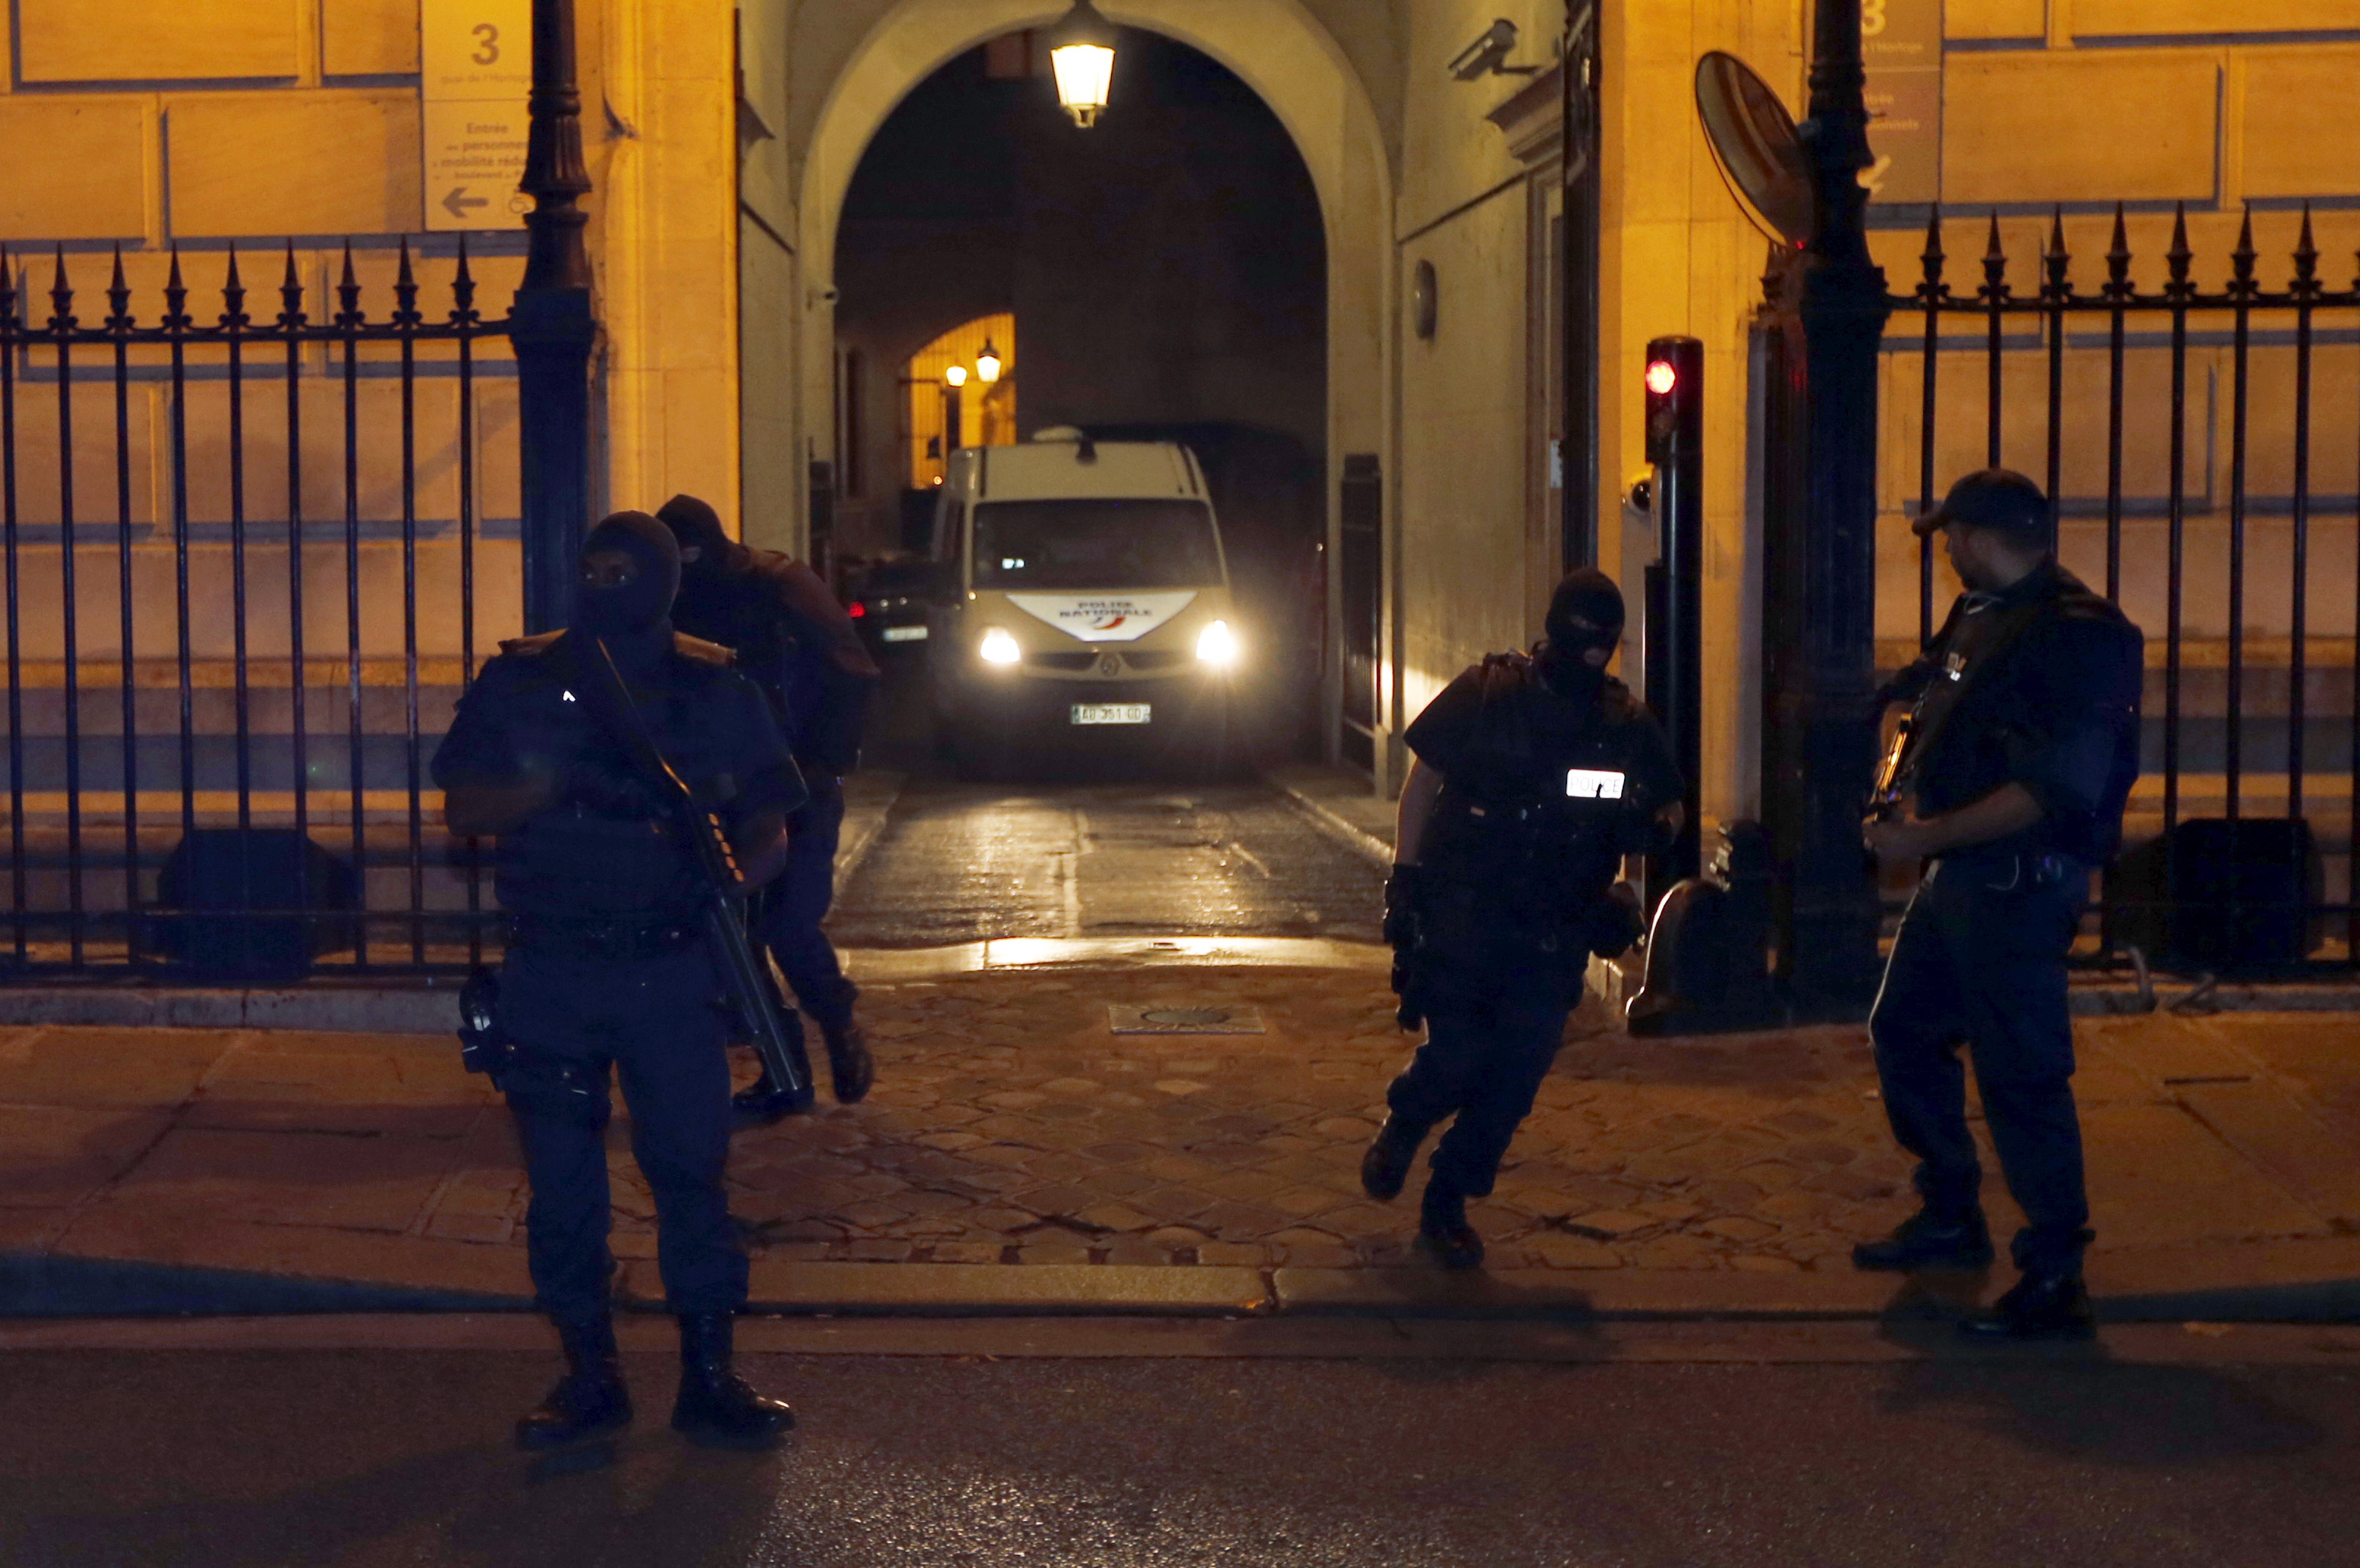 A police van believed to be transporting Moroccan Khazzani leaves the courthouse in Paris